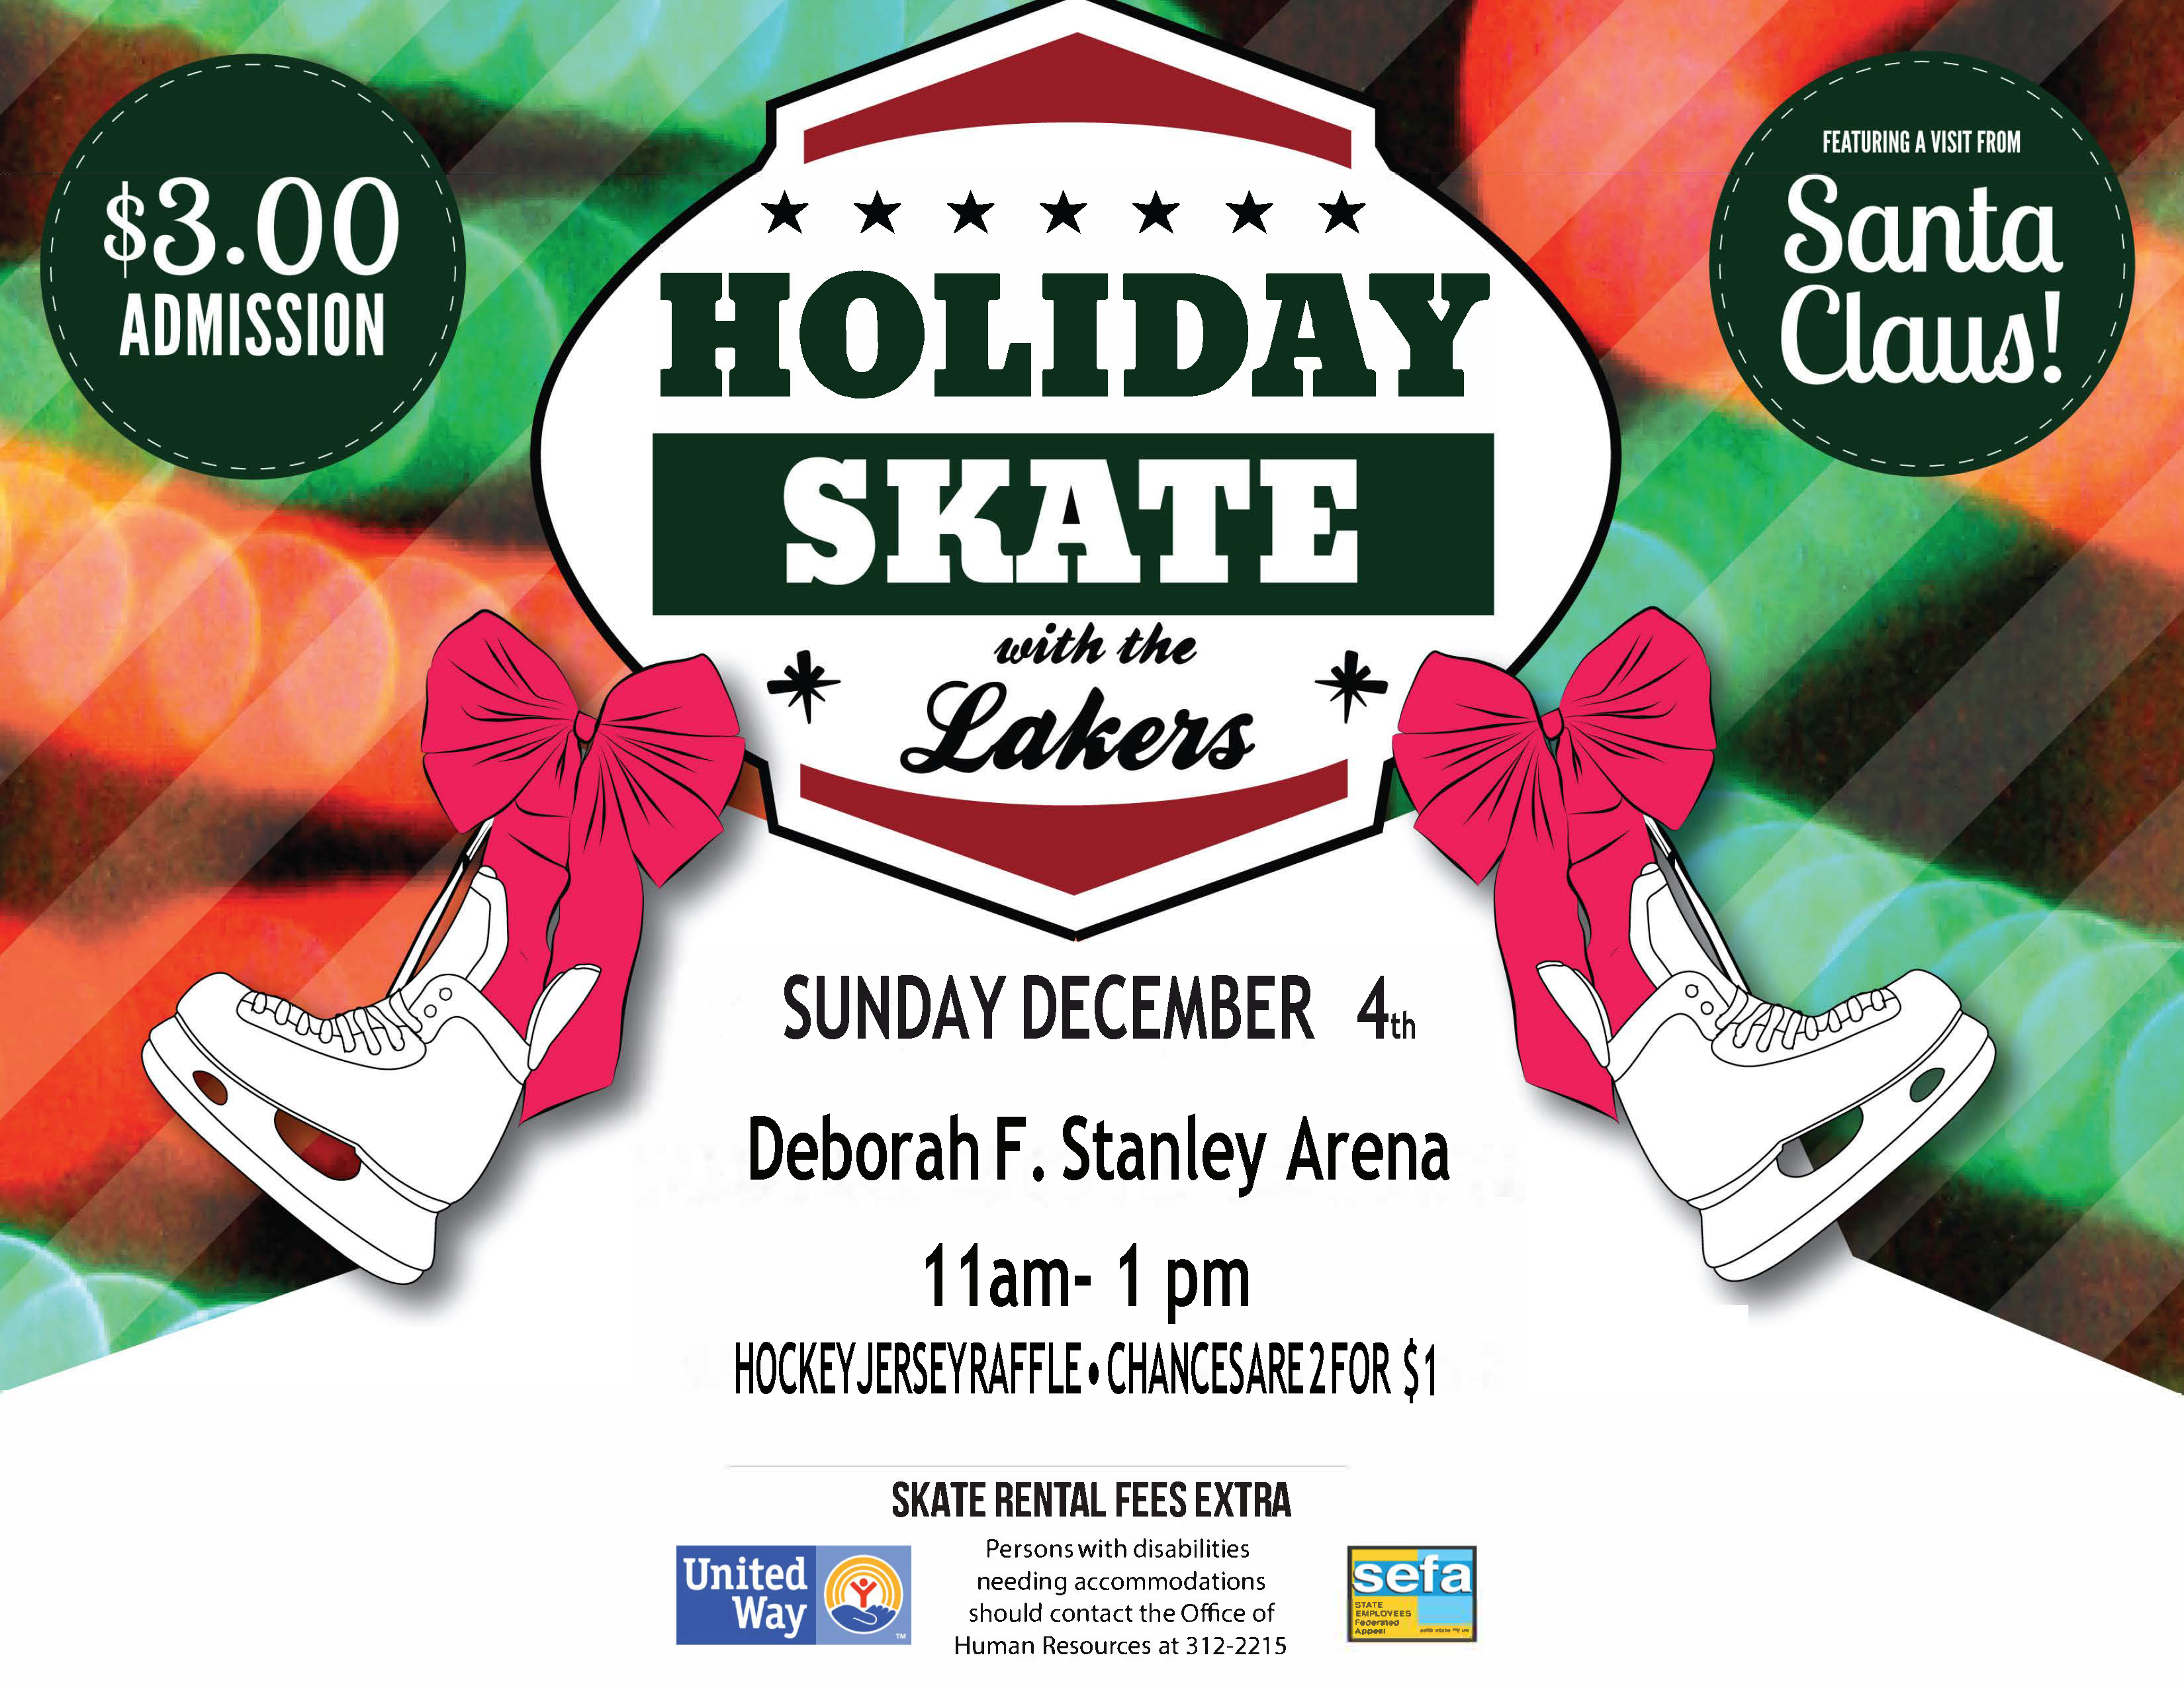 Holiday Skate details - see blow on the website